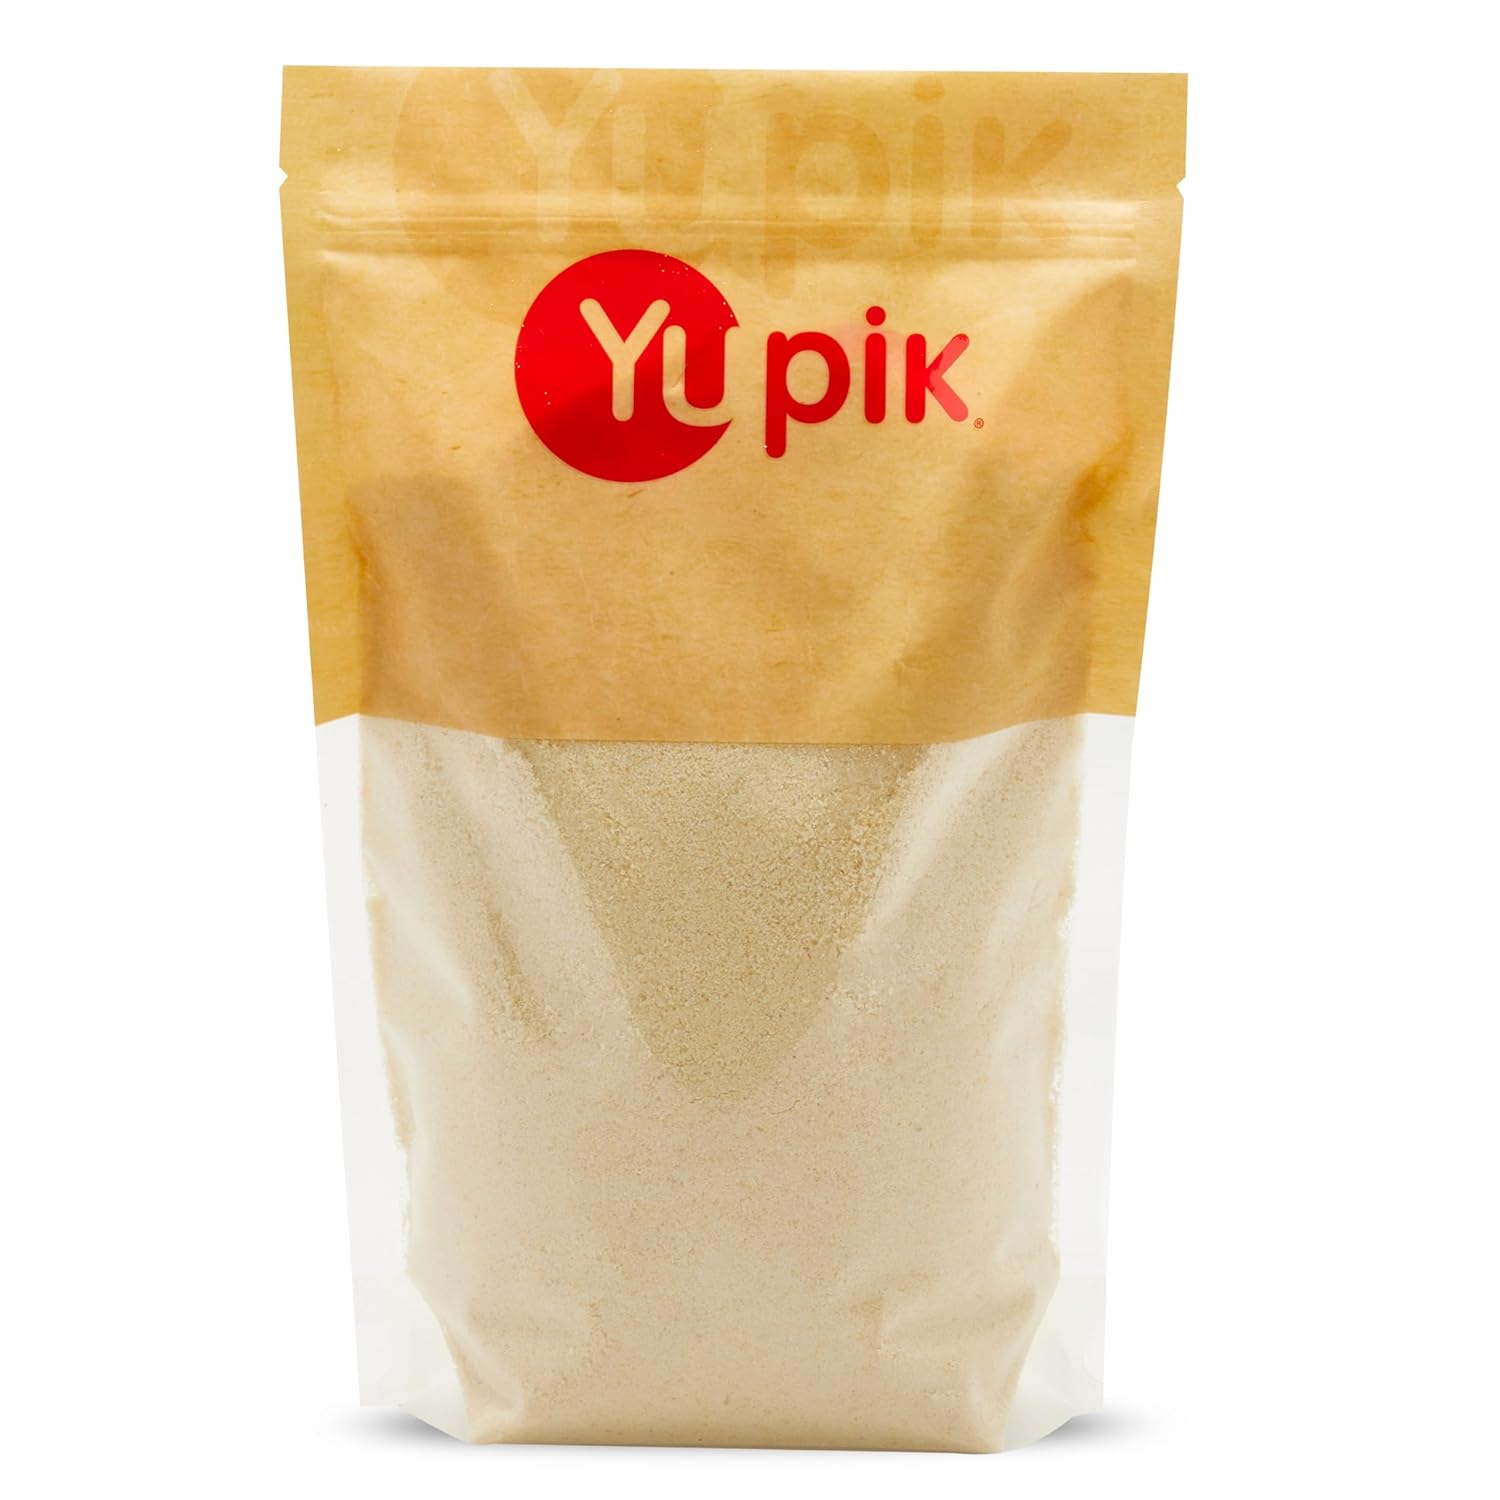 Yupik Ground Blanched Almond Flour / Meal 35.2 Ounce